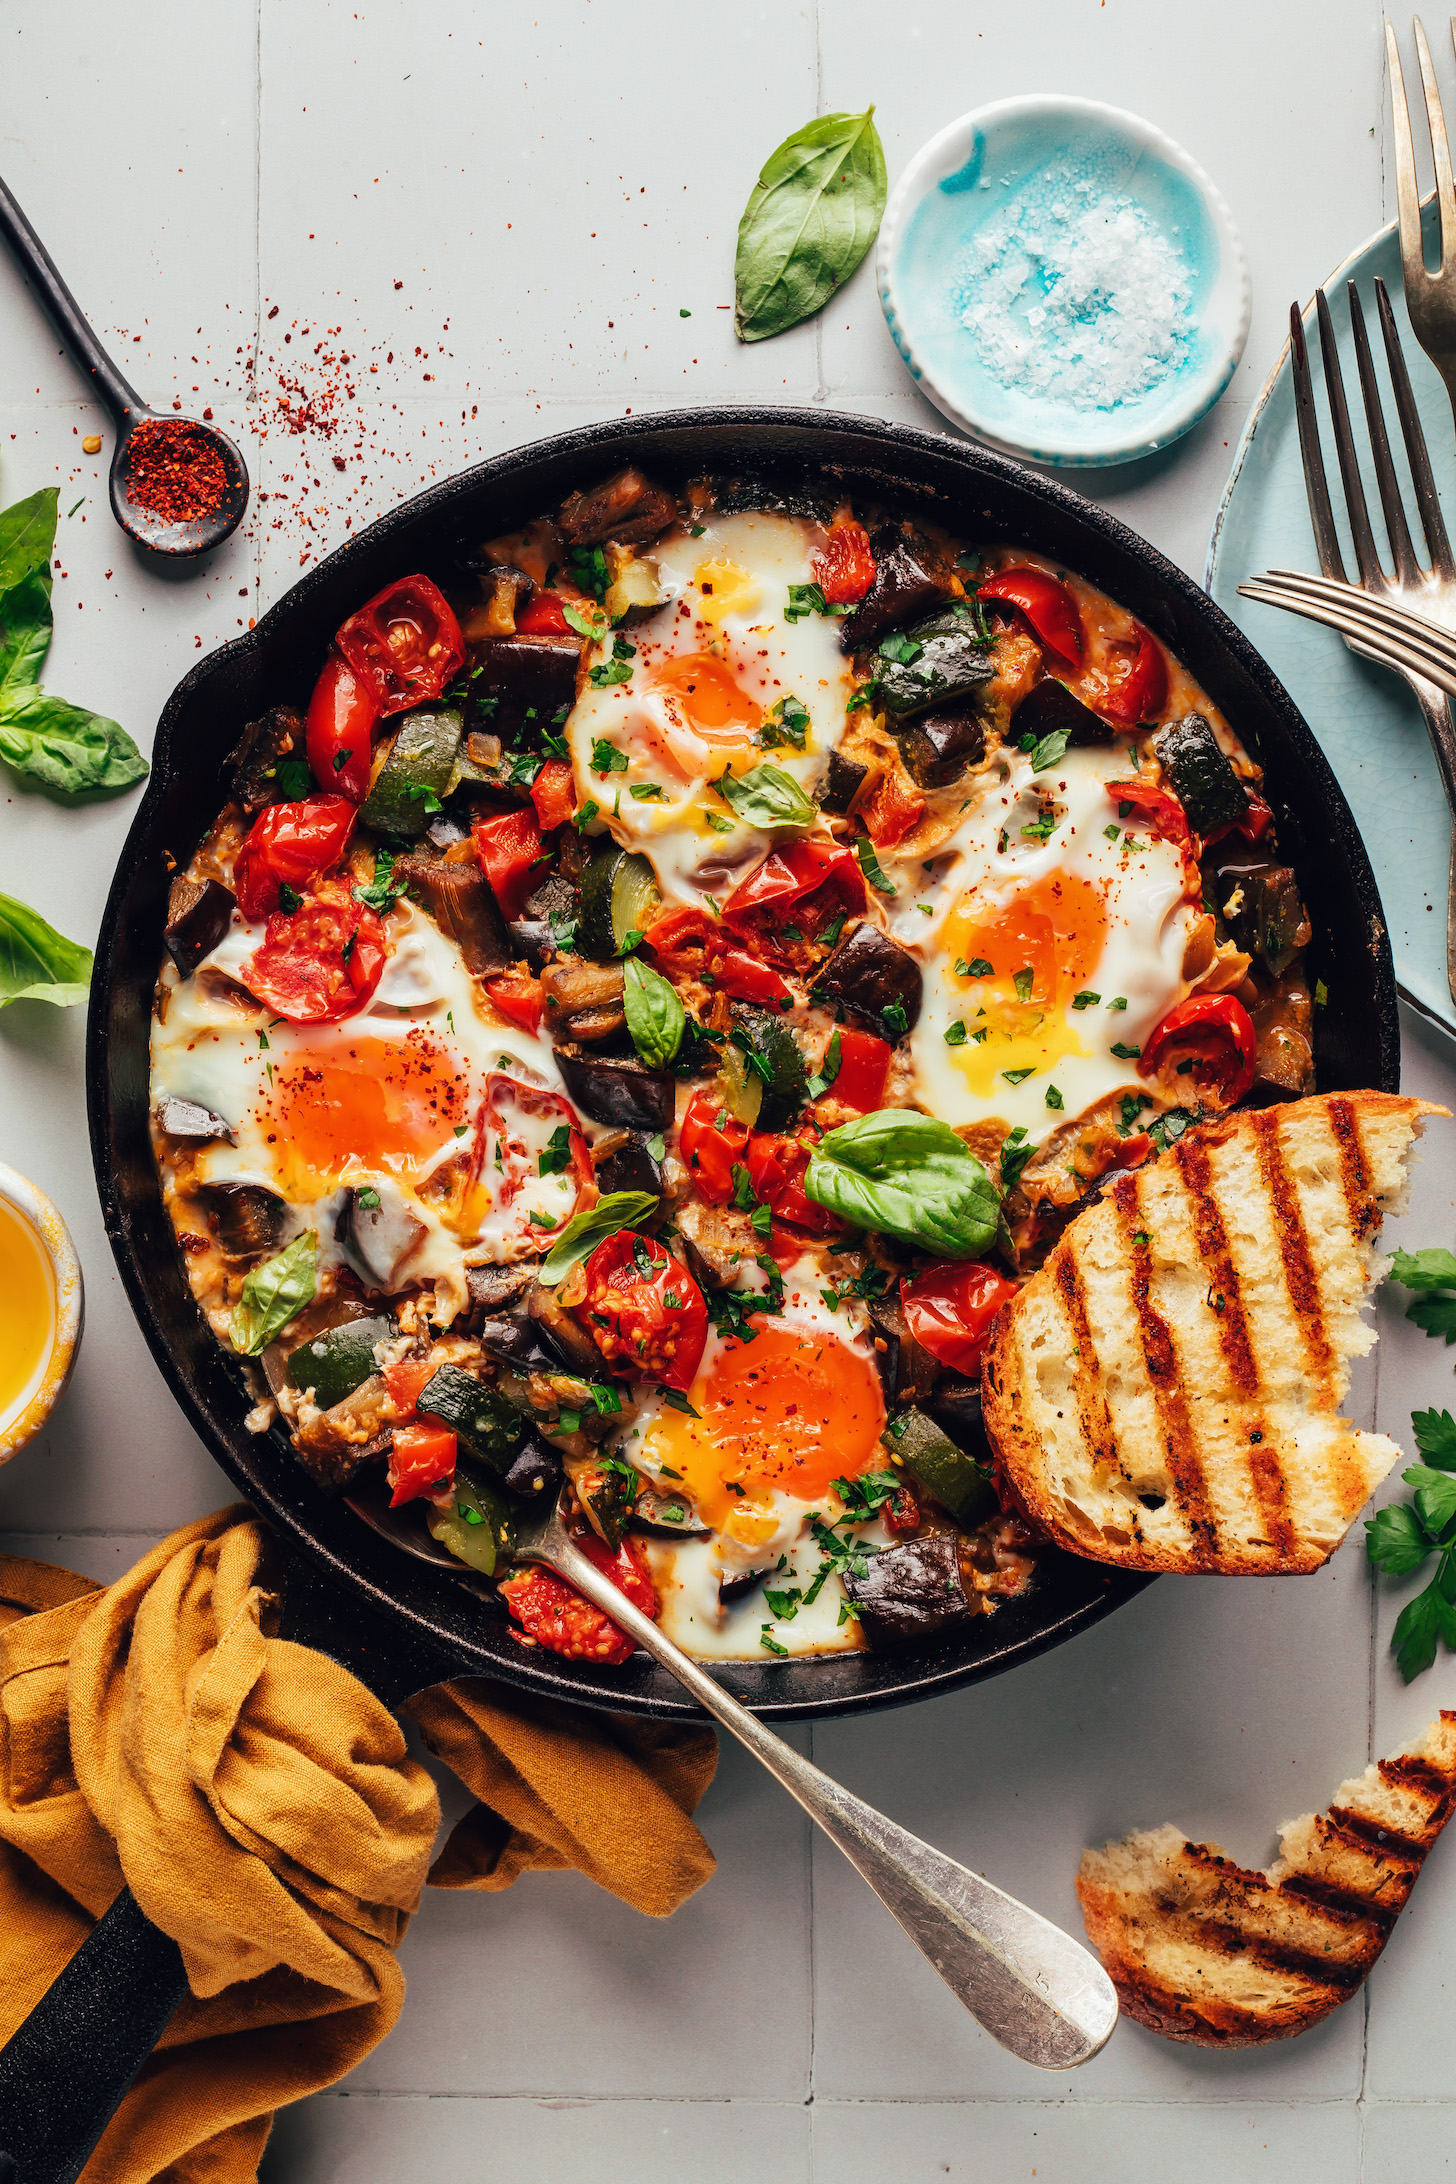 Overhead shot of a slice of bread resting on and beside a pan of skillet ratatouille and eggs